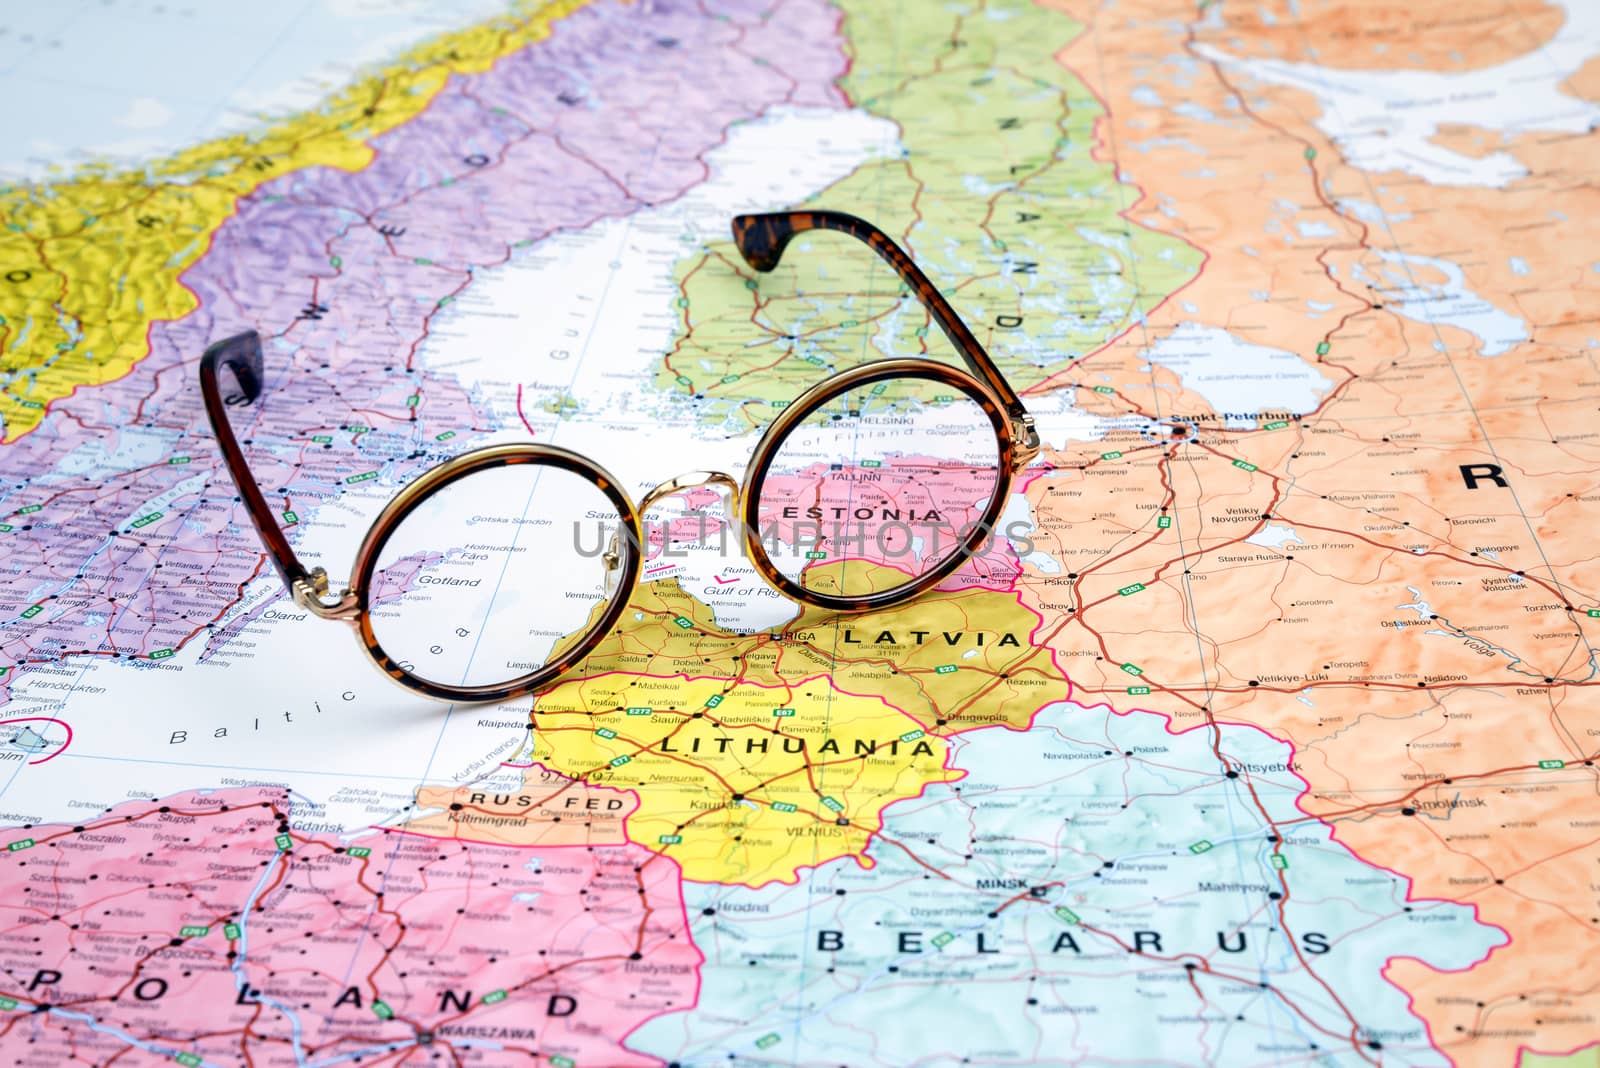 Glasses on a map of europe - Estonia by dk_photos